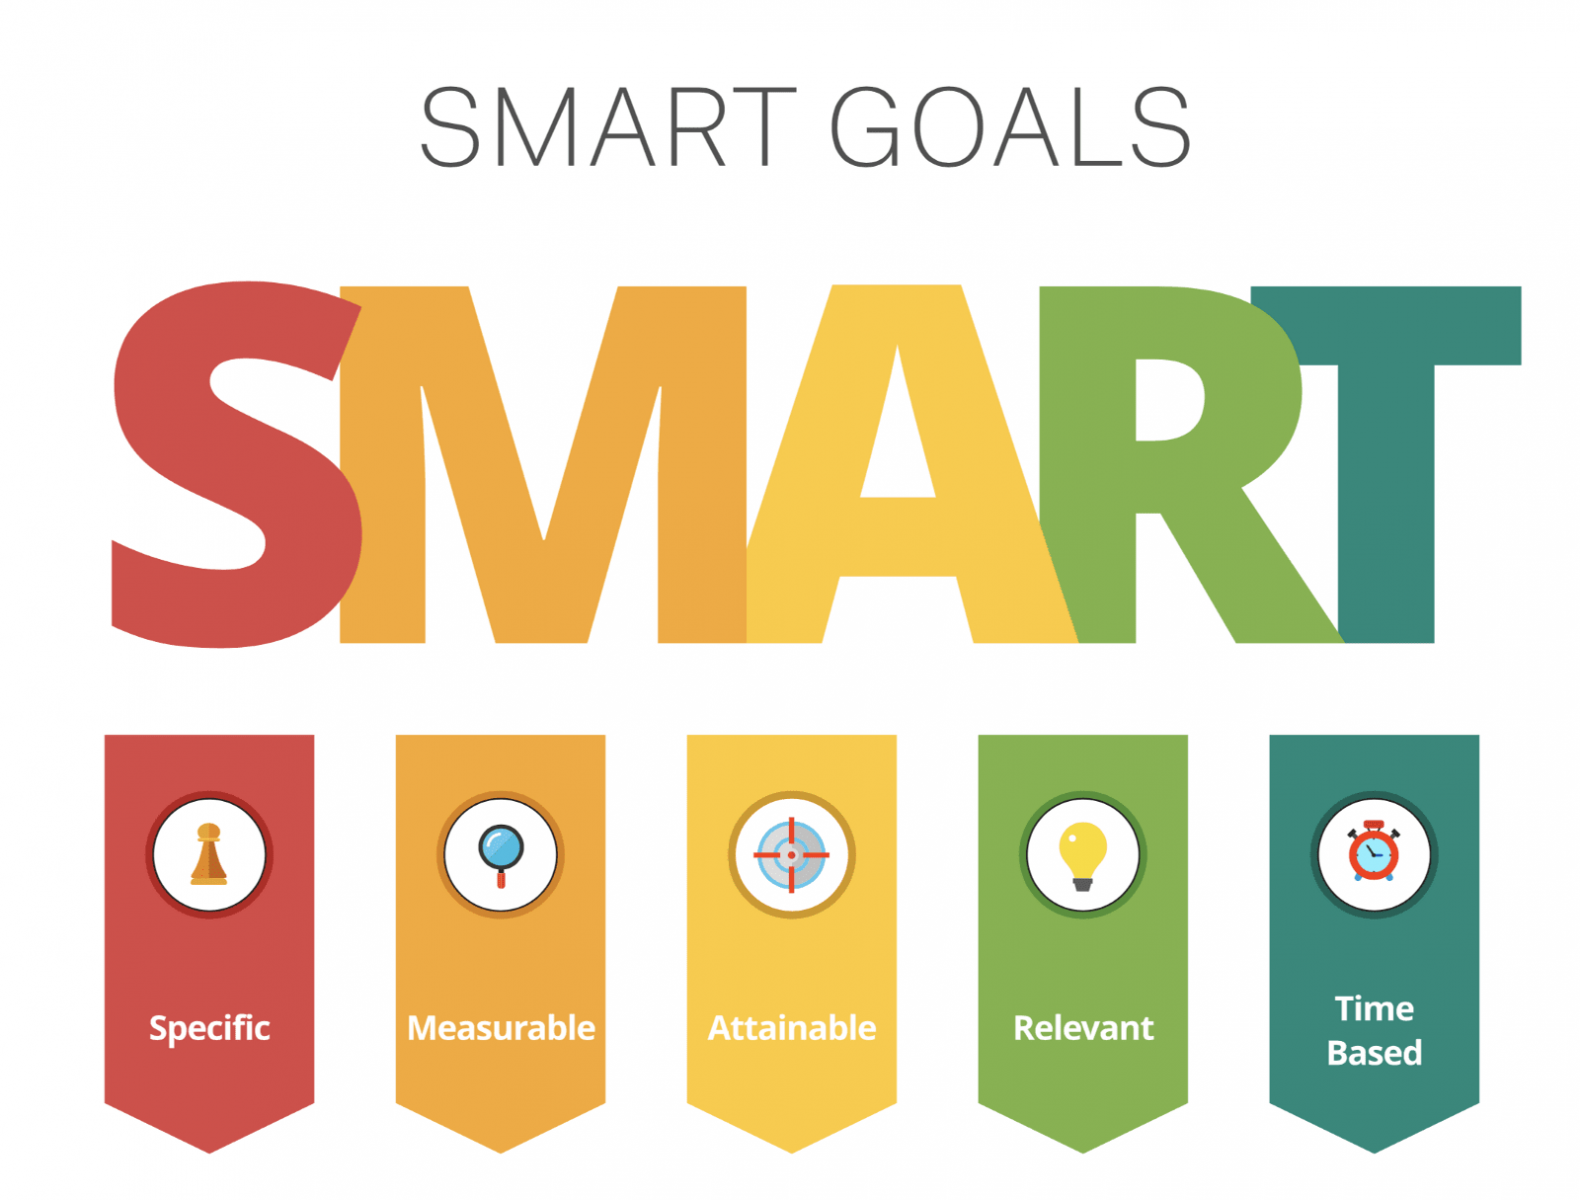 What is Smart Model? How to apply SMART goals effectively in your company